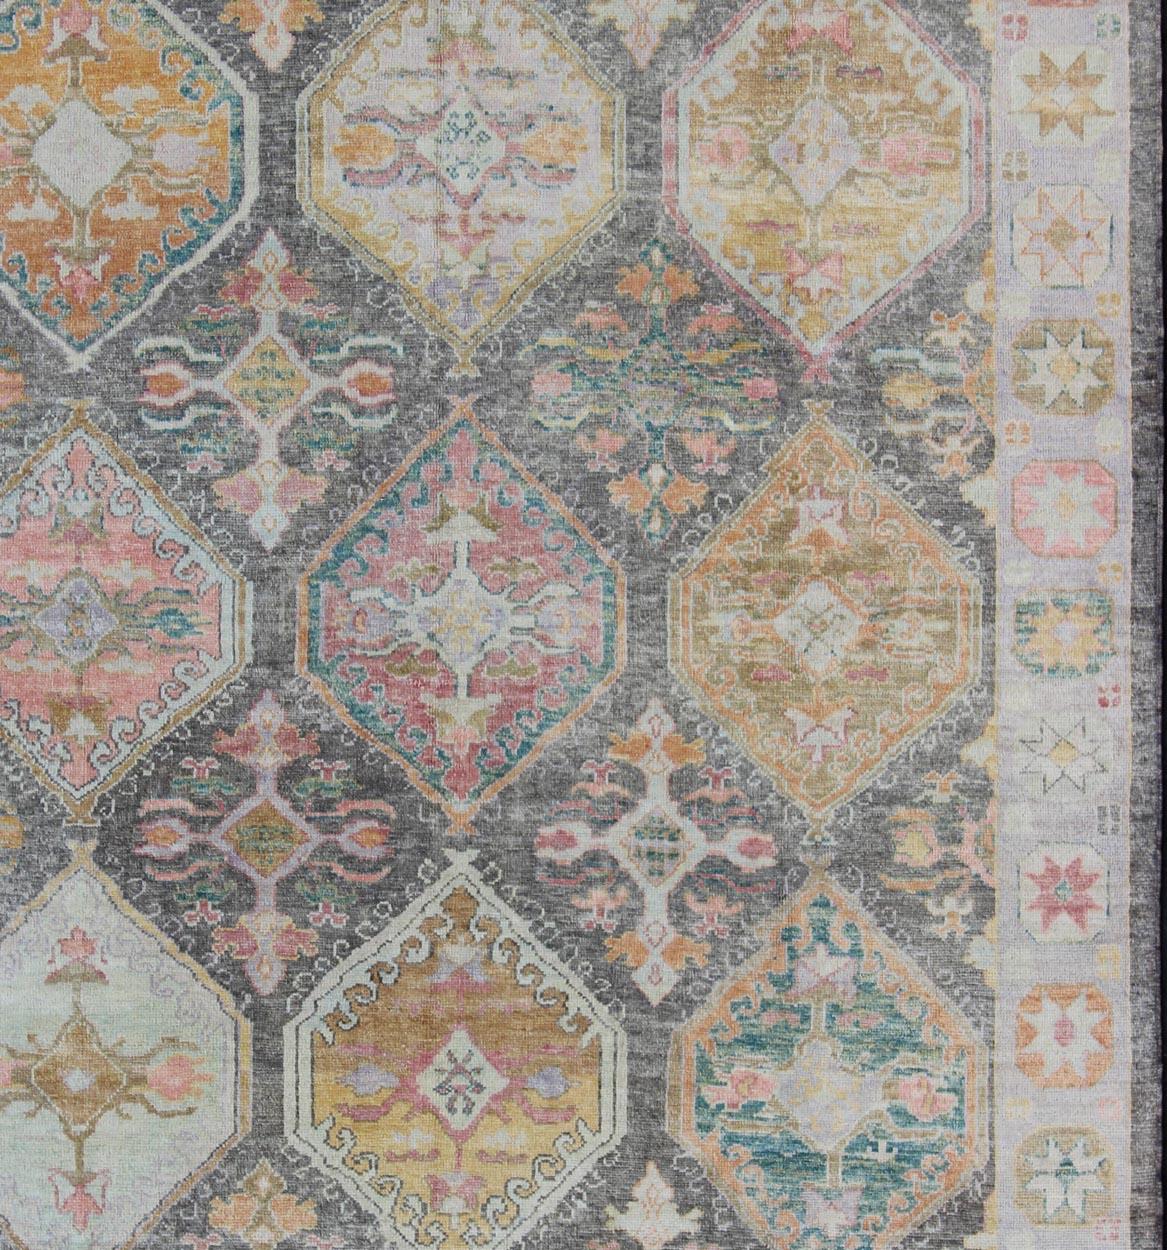 Turkish Oushak rug with bold design and color palette and all-over large diamond medallion design, rug EN-179696, country of origin / type: Turkey / Oushak

This unique design Oushak rug from Turkey features a bold design with fun color palette